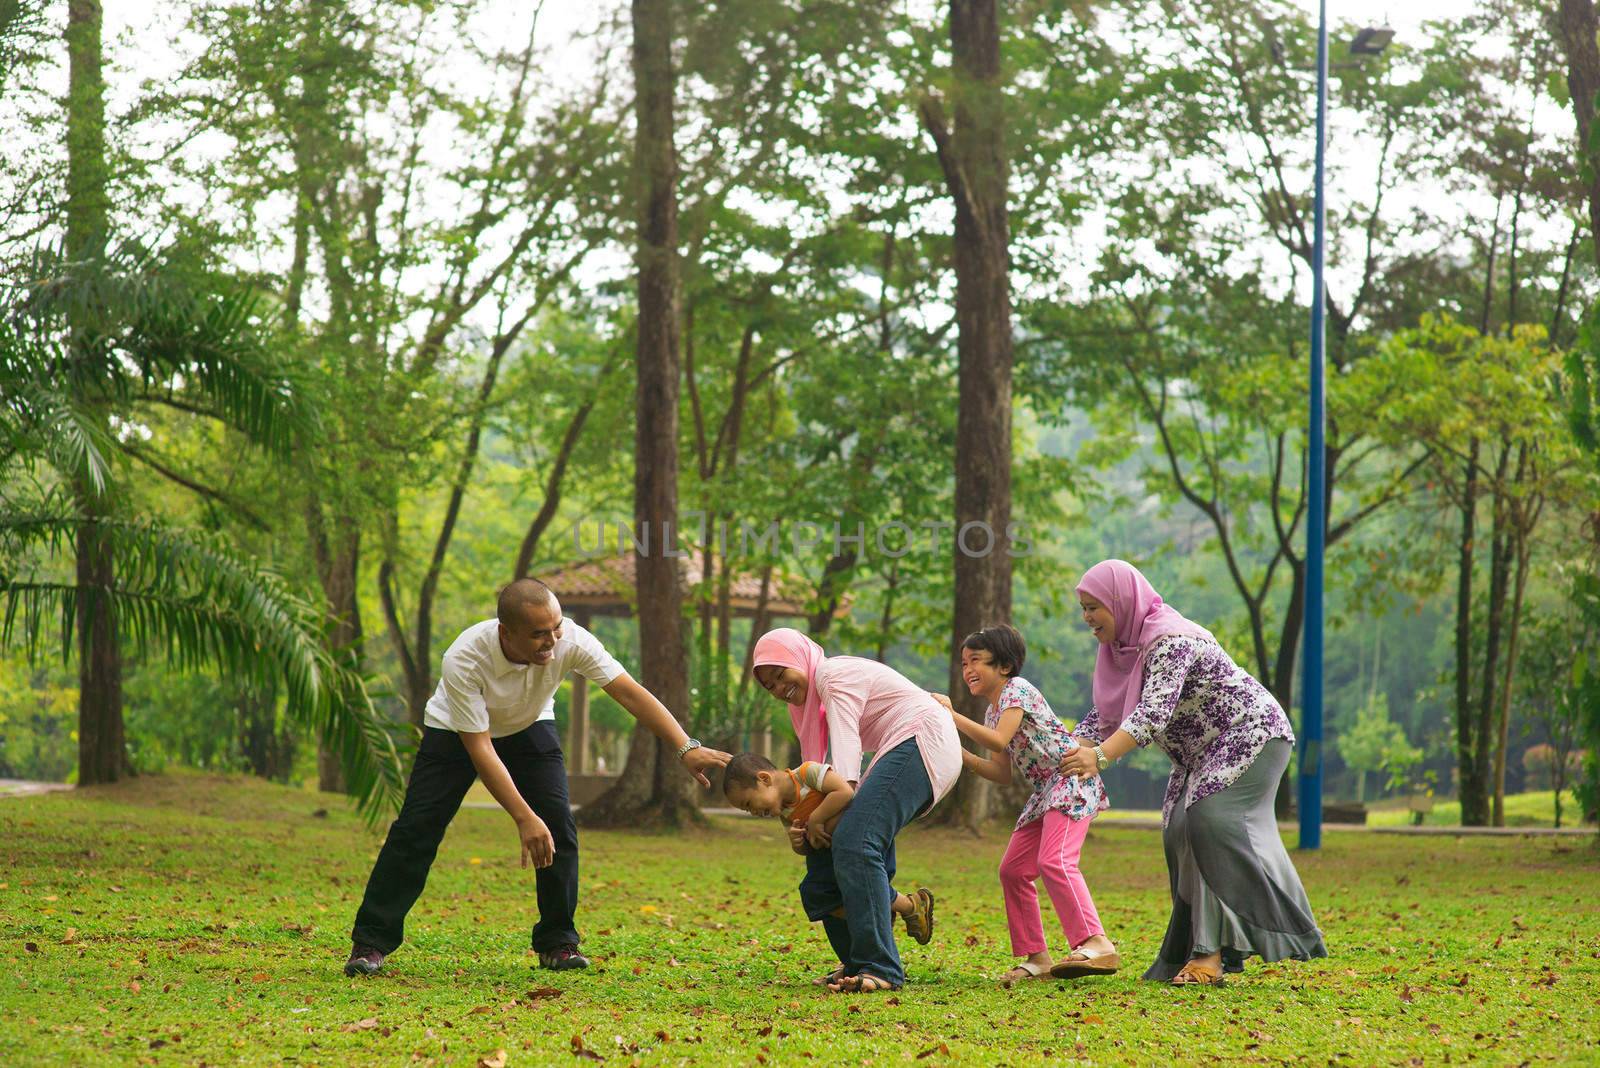 Muslim family having fun at green outdoor park. Beautiful Southeast Asian family playing together.